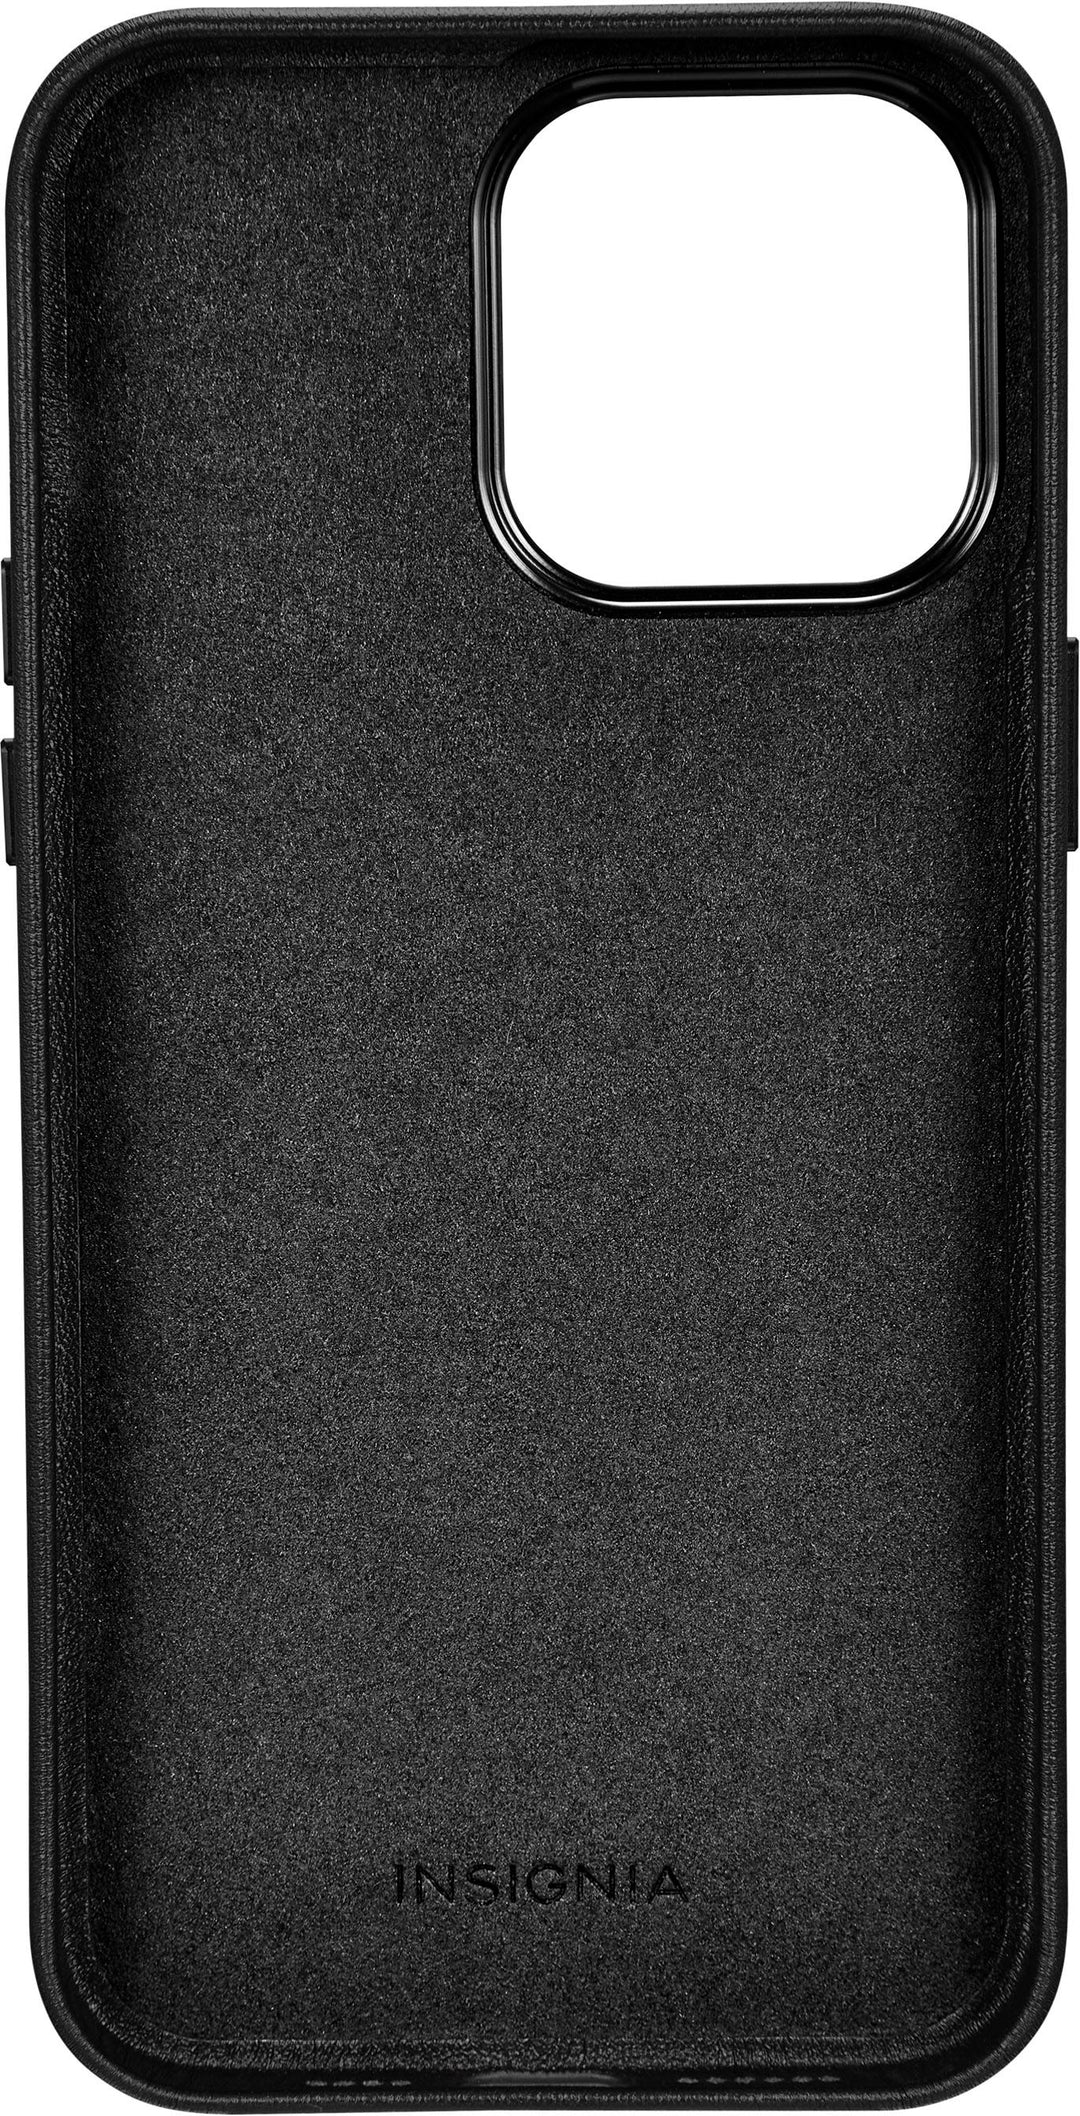 Insignia™ - Leather Wallet Case for iPhone 14 Pro Max - Black_4